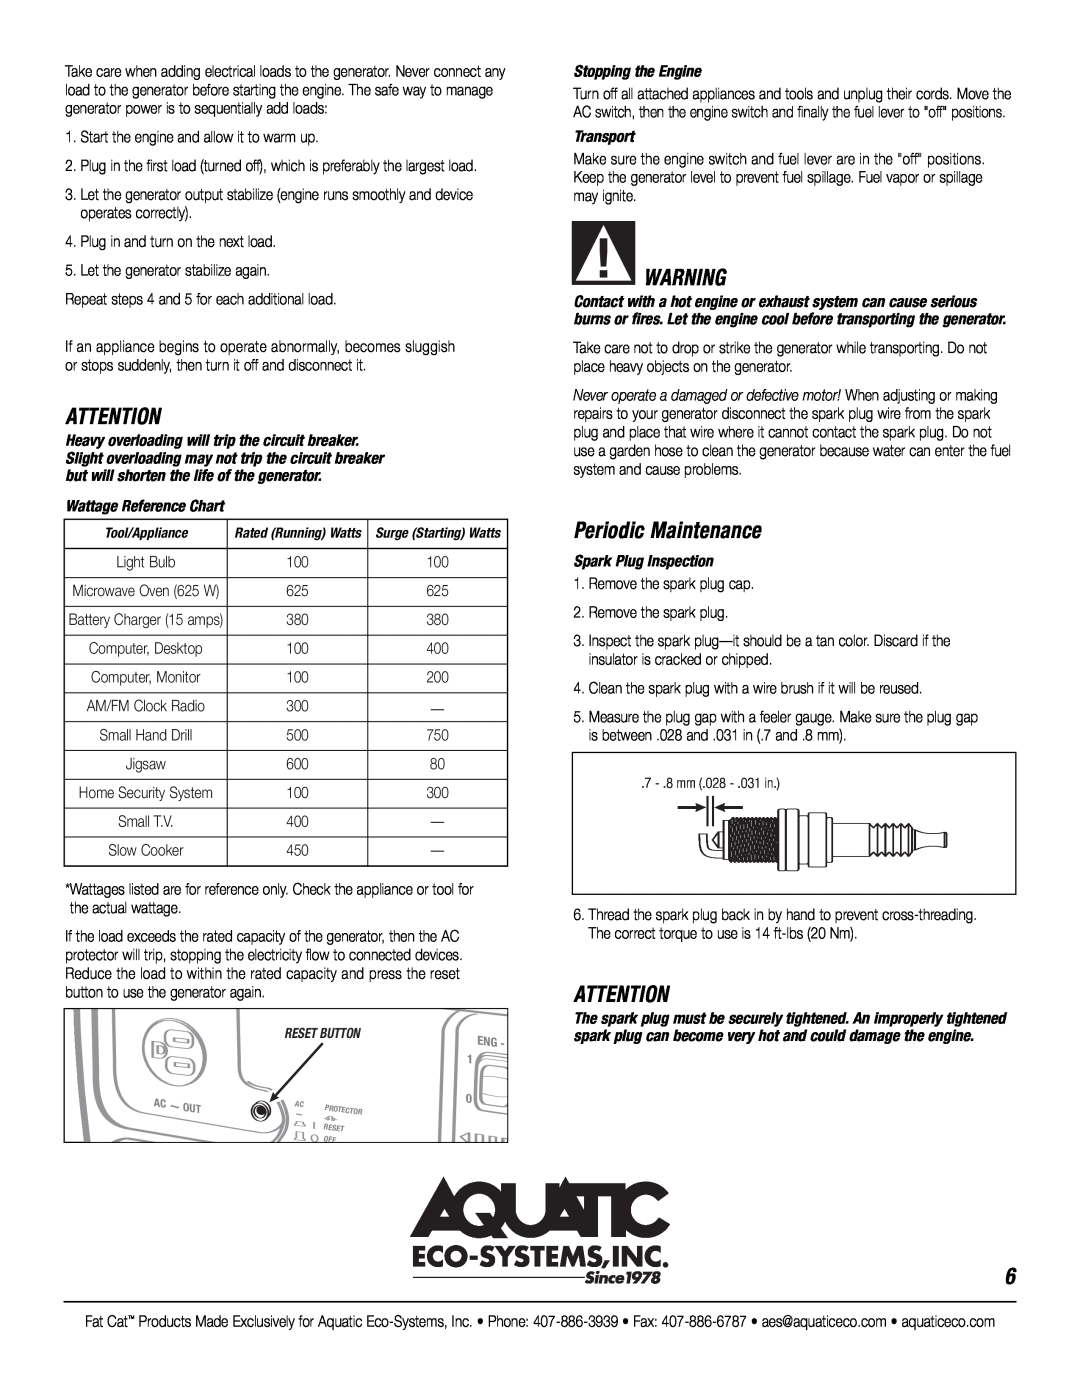 CAT GT950 manual Periodic Maintenance, Wattage Reference Chart, Stopping the Engine, Transport, Spark Plug Inspection 